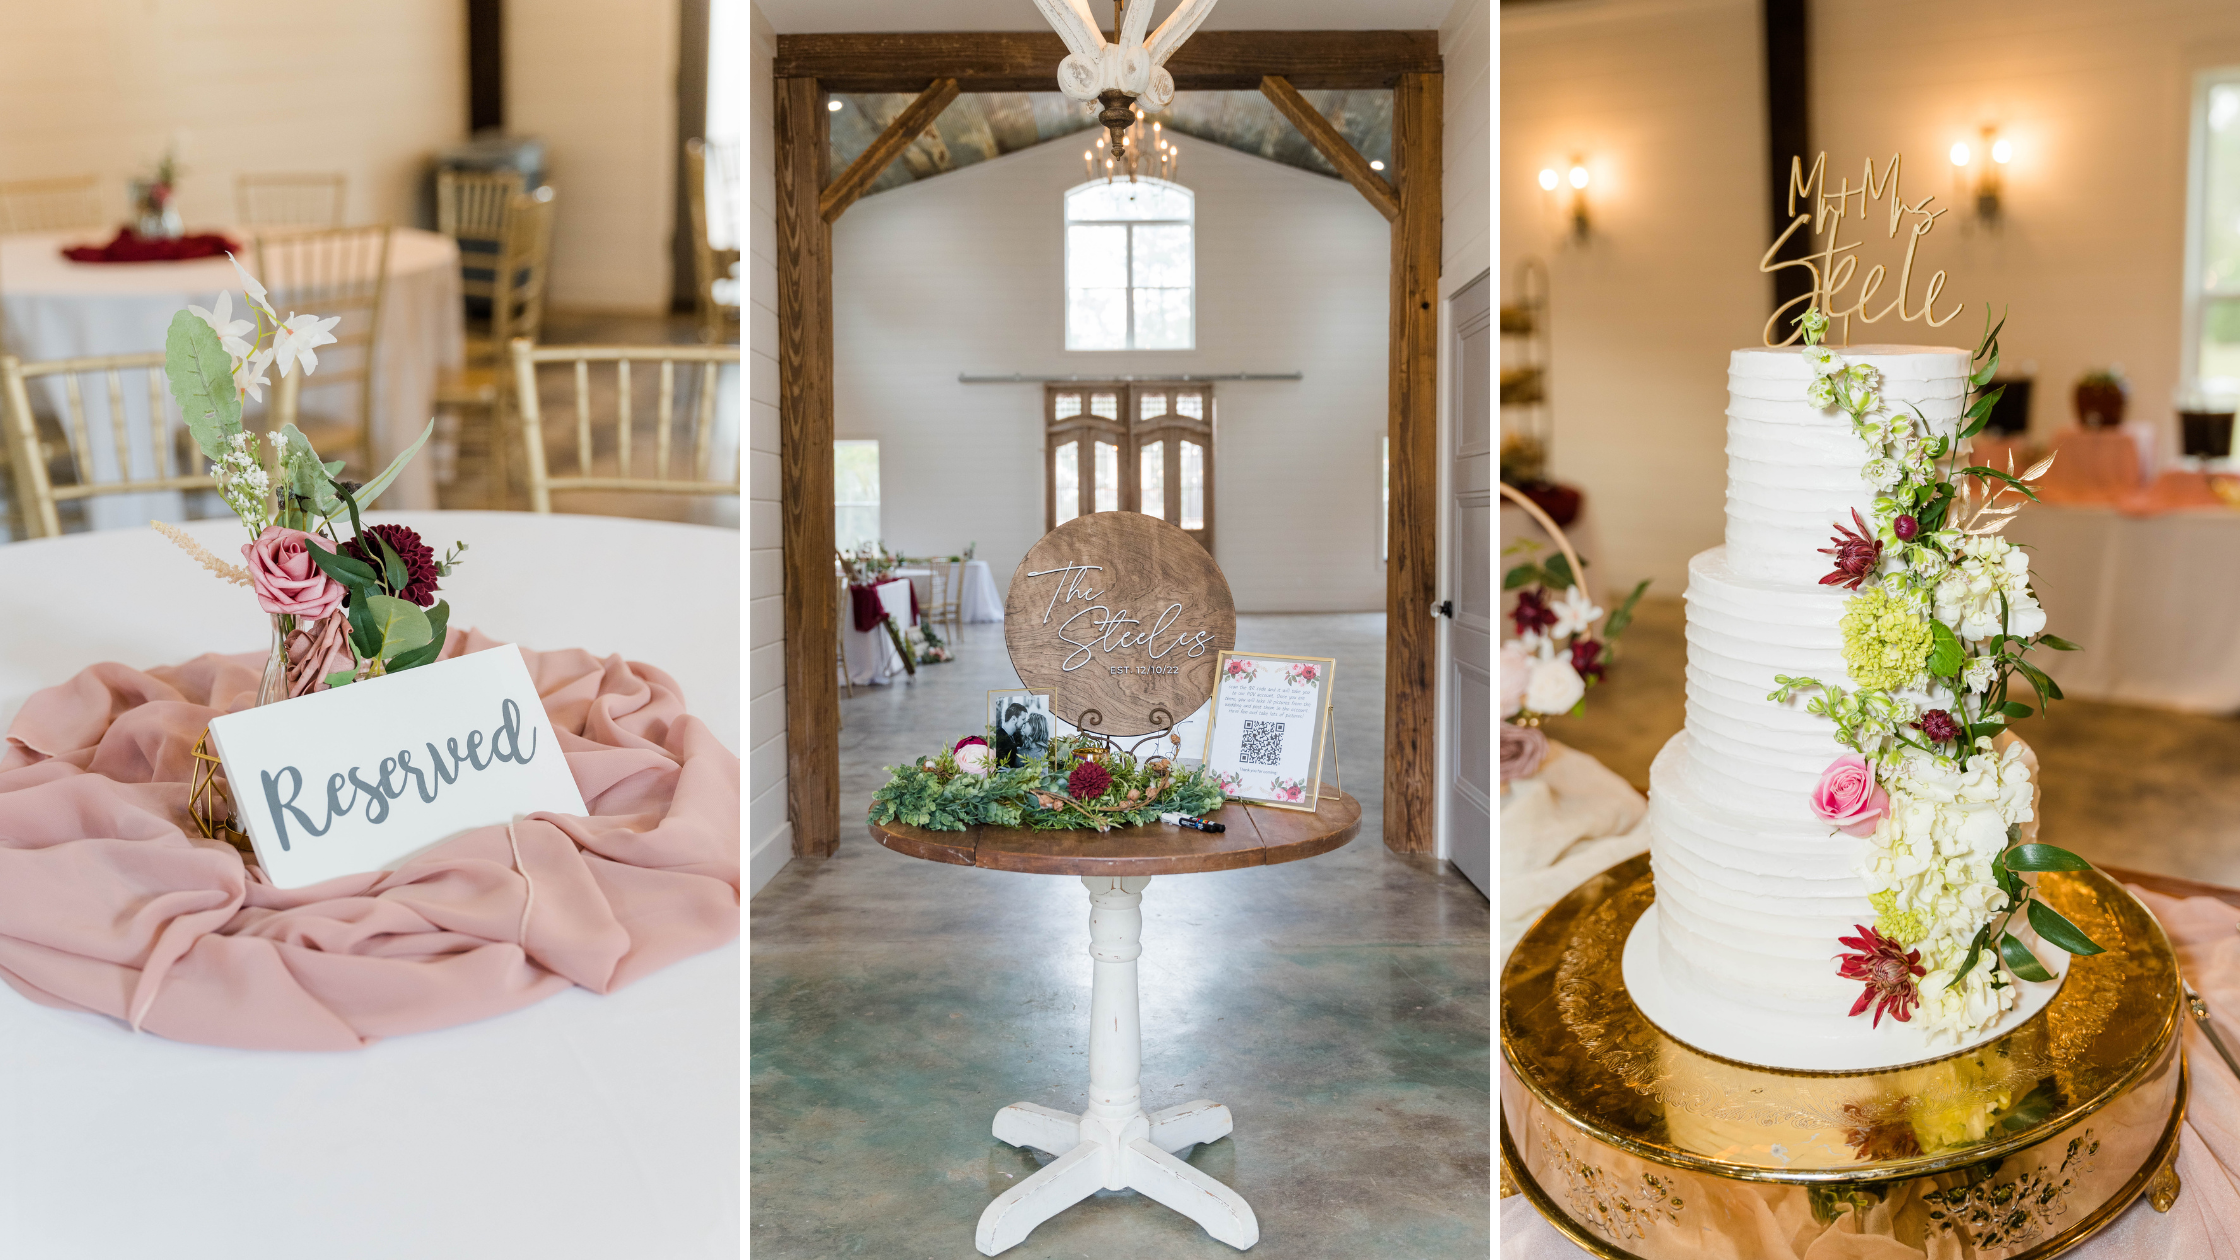 The Venue at Anderson Oaks in Lucedale Mississippi Wedding Photography